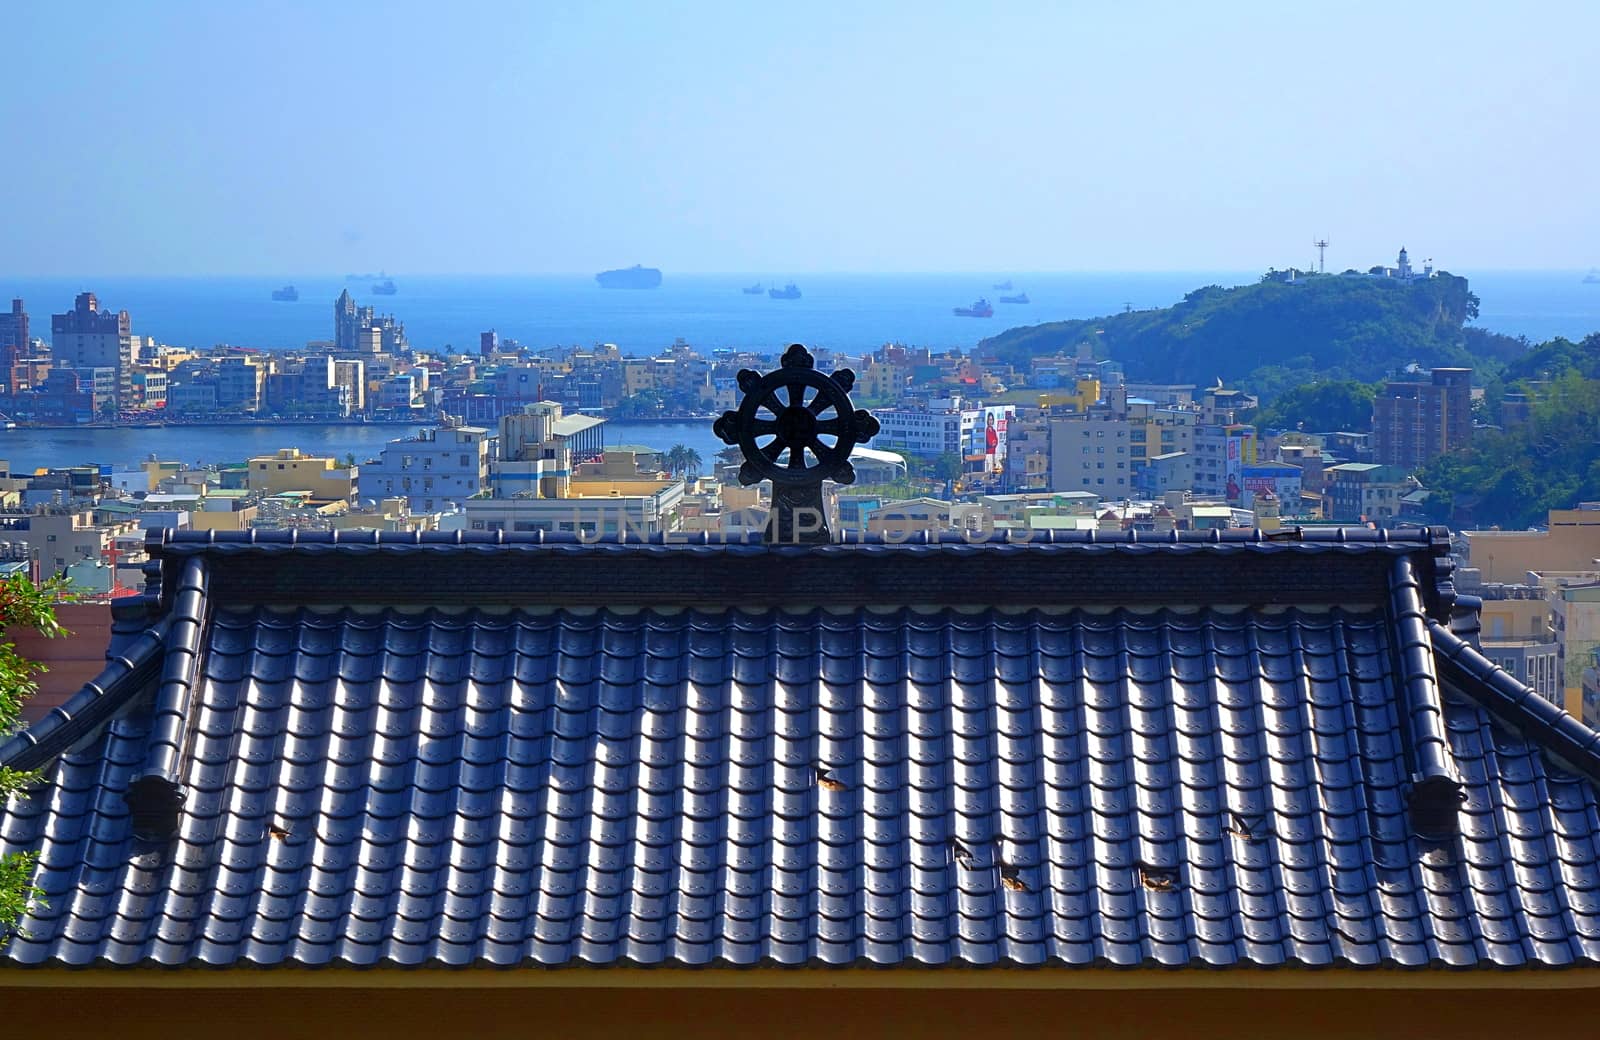 KAOHSIUNG, TAIWAN -- APRIL 29, 2017: View of Kaohsiung Port and Chijin Island over the roof of the Qian Guang Temple. The roof is decorated with a Dharma Wheel of Life.